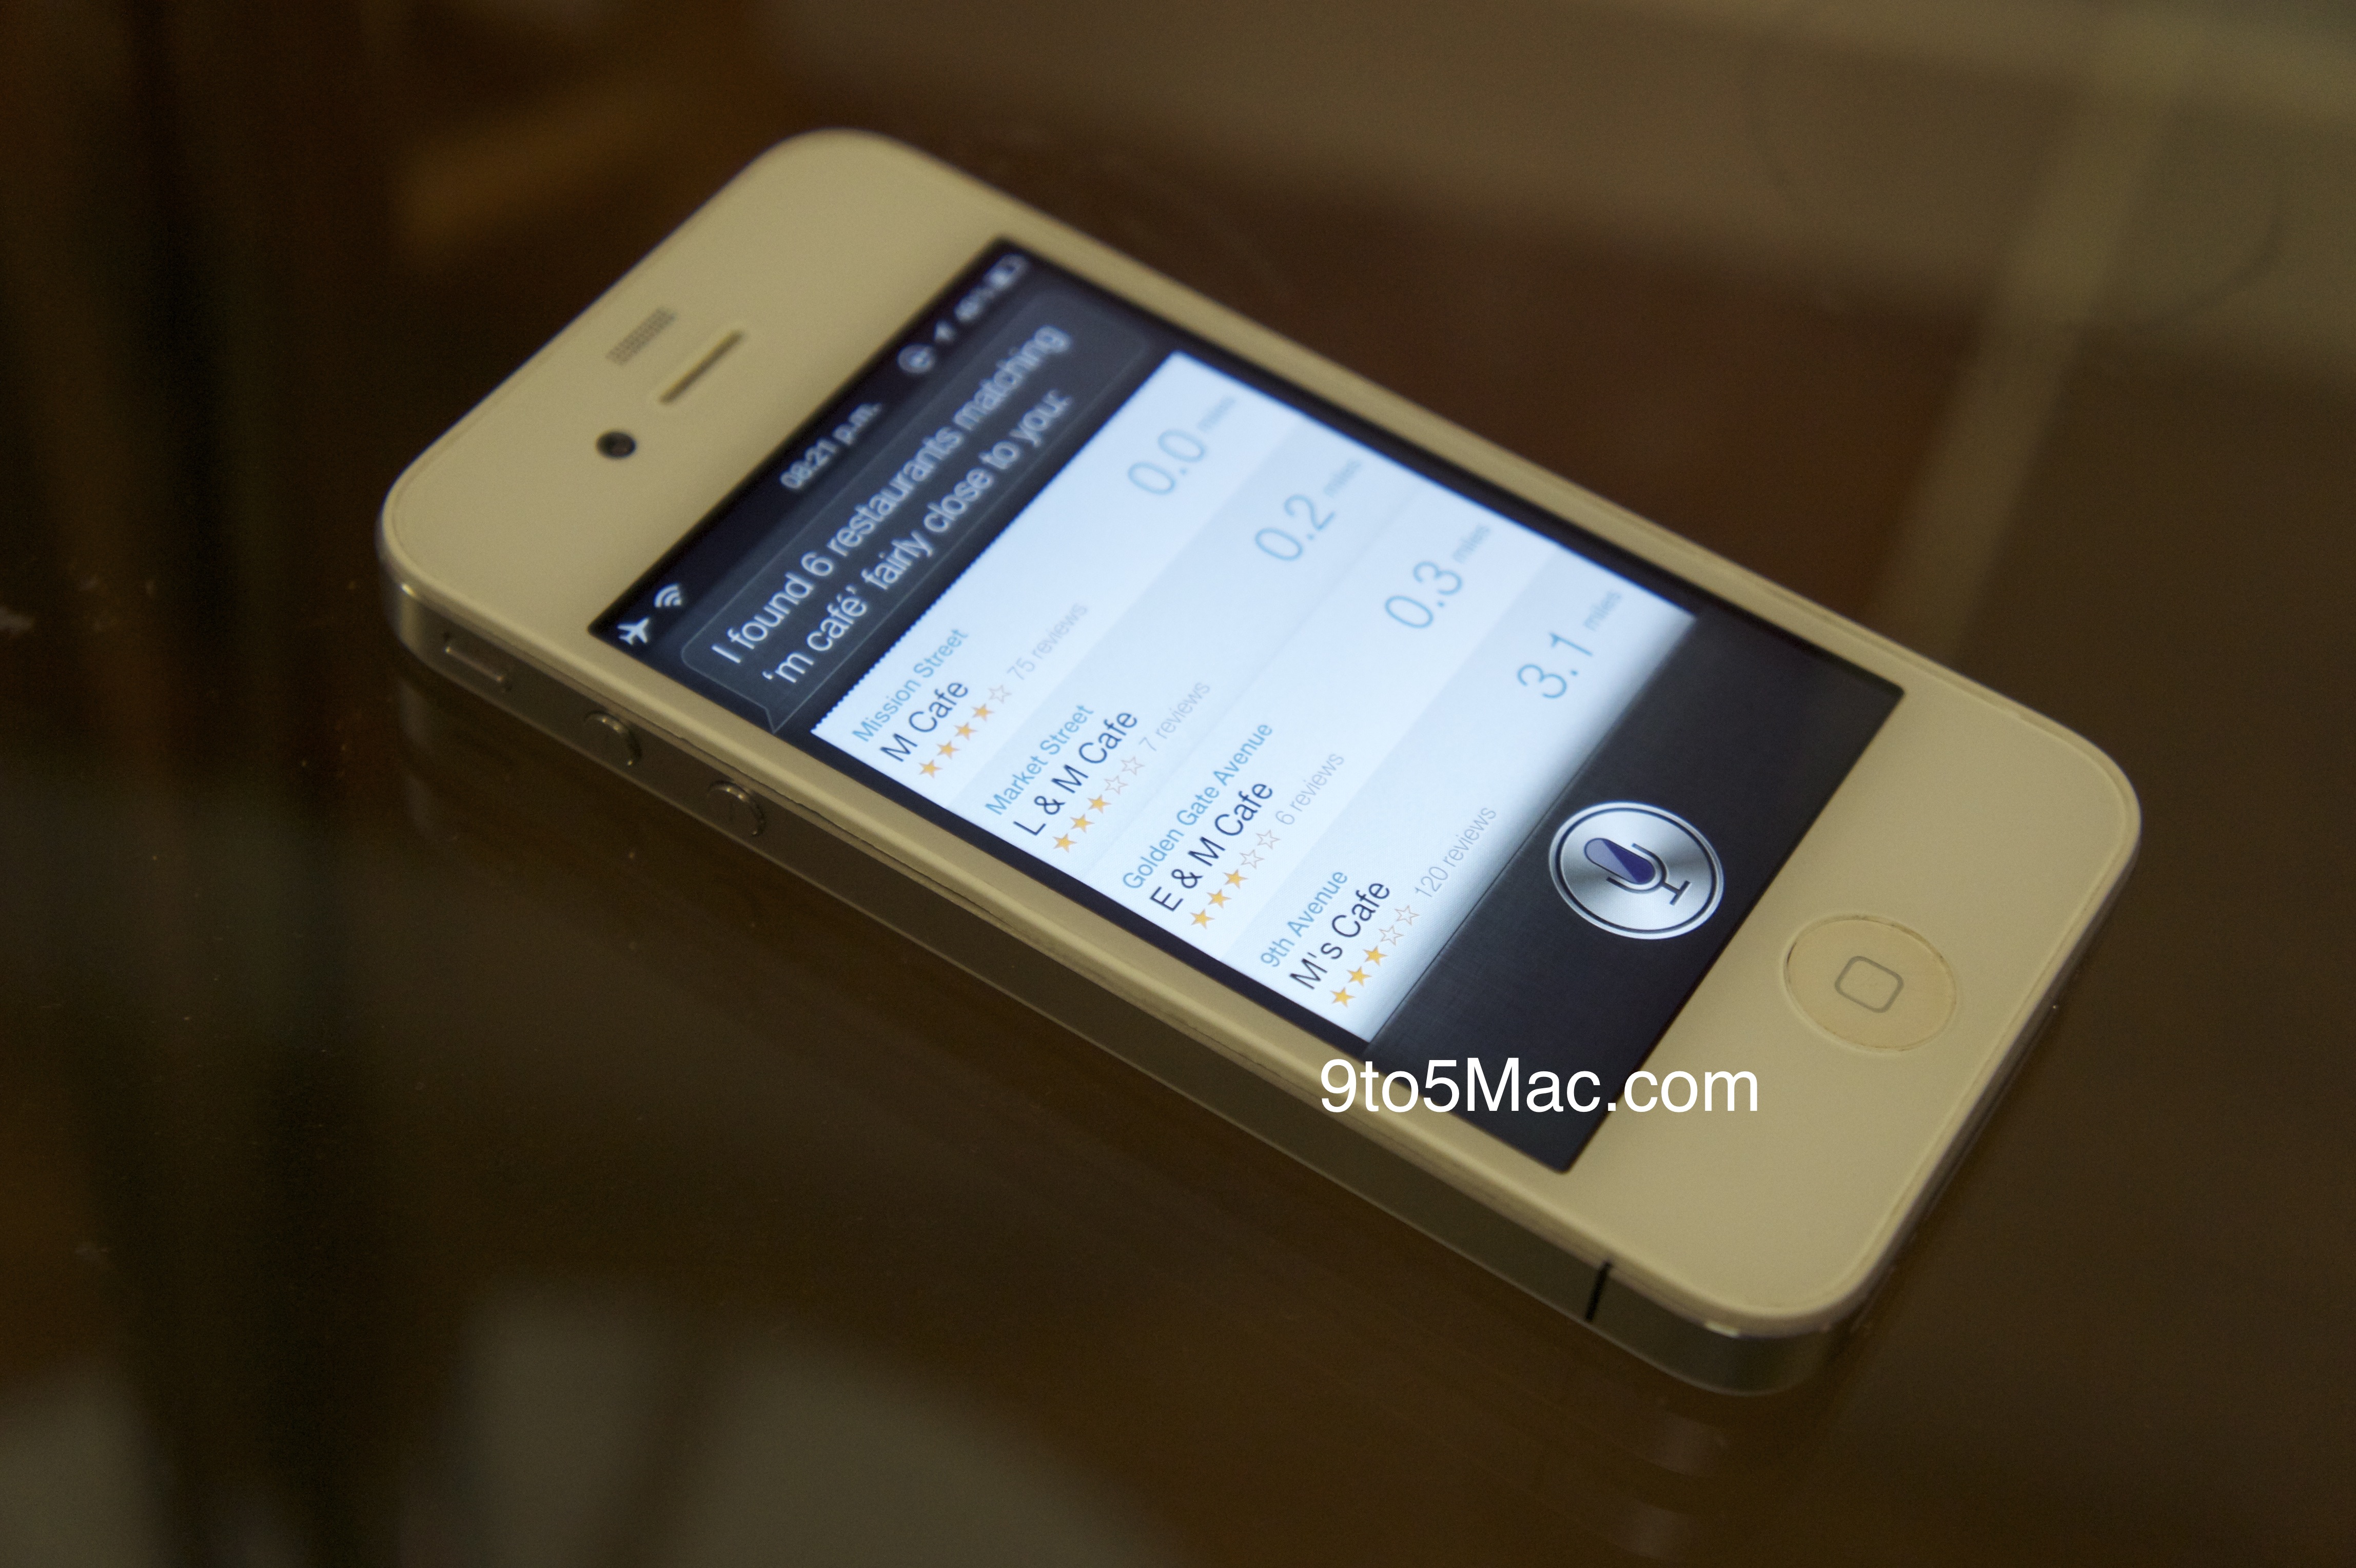 Siri hacked to fully run on the iPhone 4 and iPod touch, iPhone 4S 